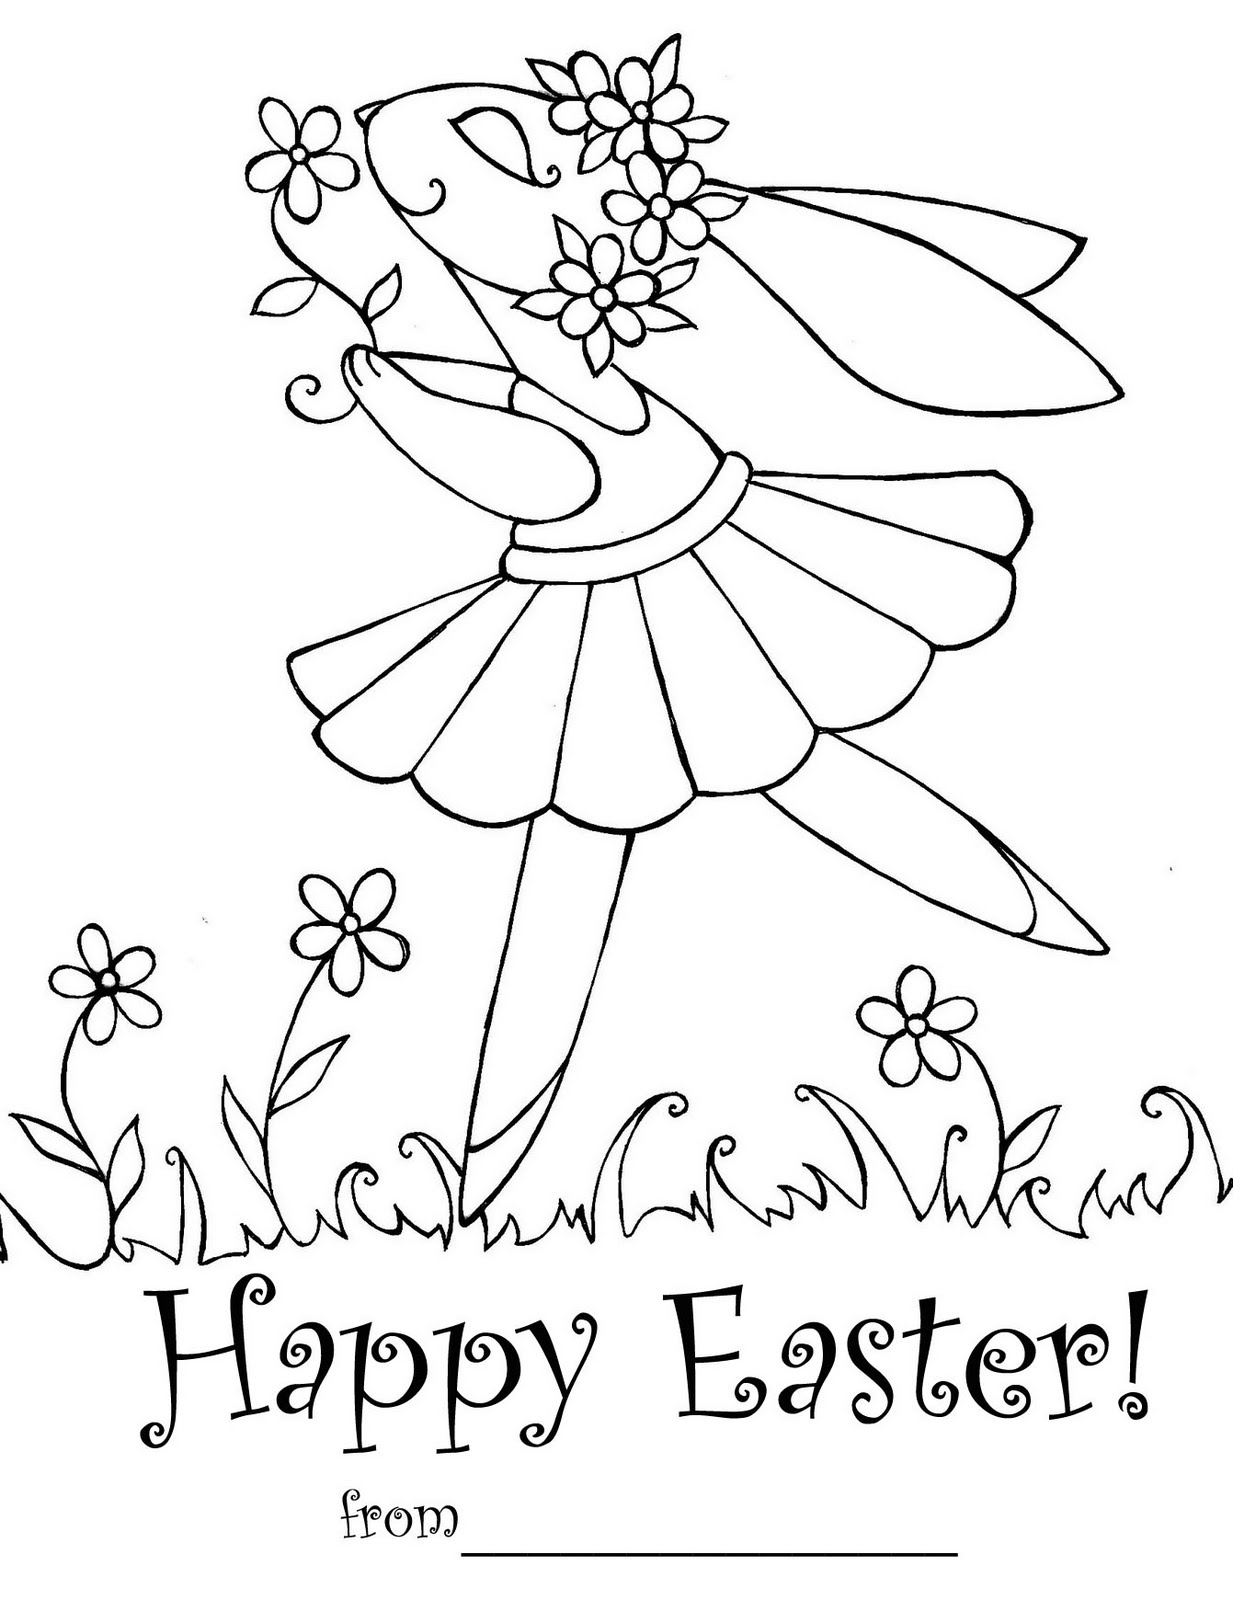 EASTER COLOURING: HIGH RESOLUTION EASTER COLOURING PAGE